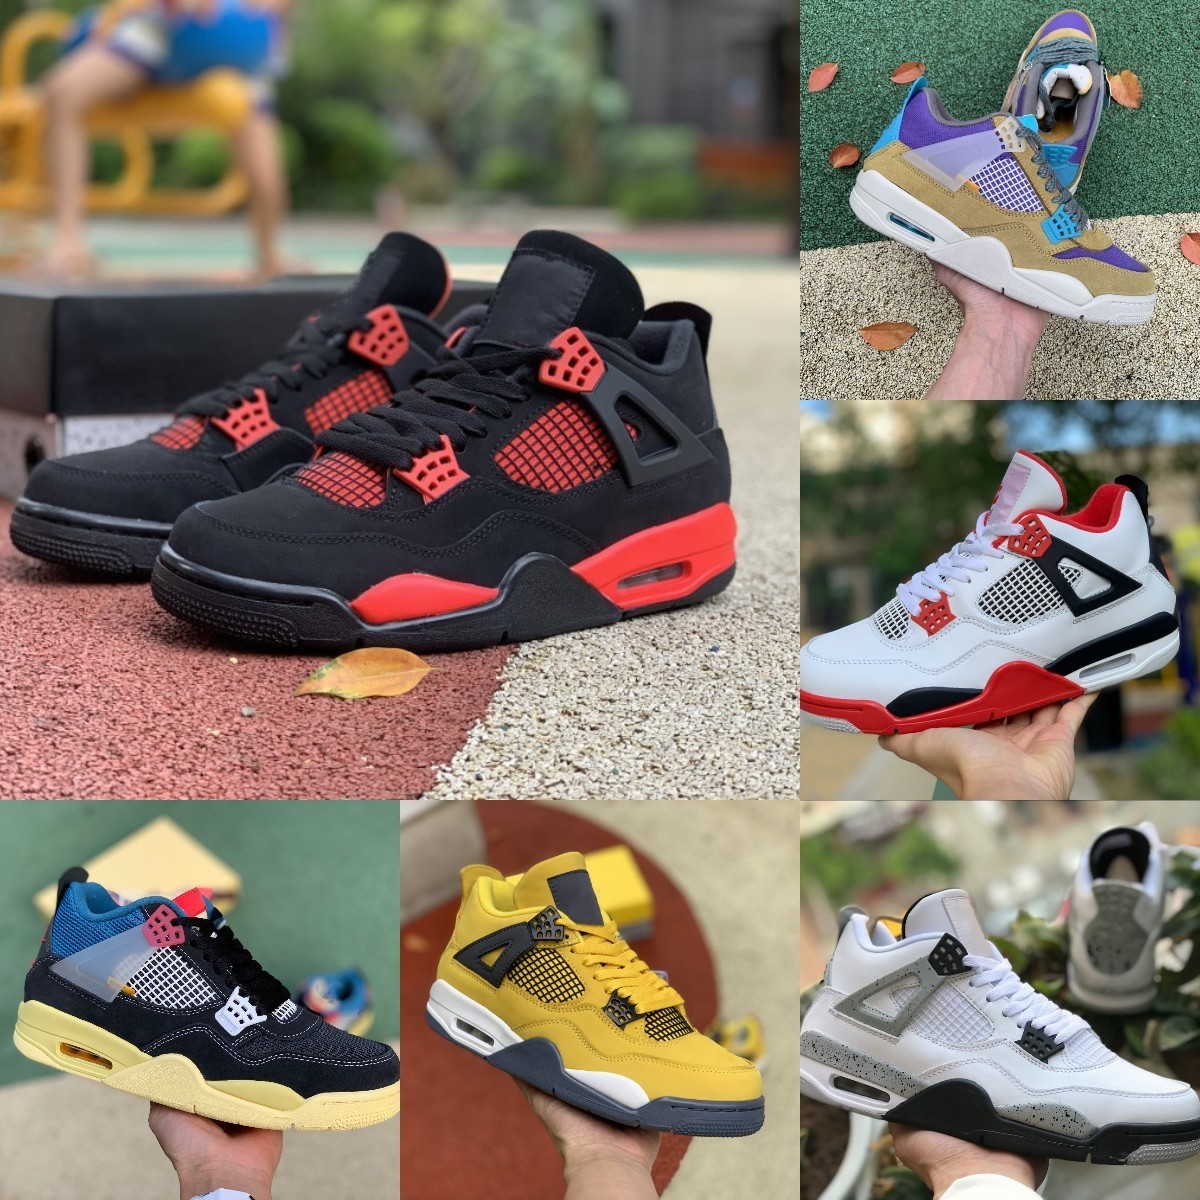 

Designer Infrared 4 4s Basketball Shoes Jumpman Mens Women University Blue Military Black Cement Cat Cream Sail White Oreo Bred Red Thunder Trainers Sneakers S15, Please contact us